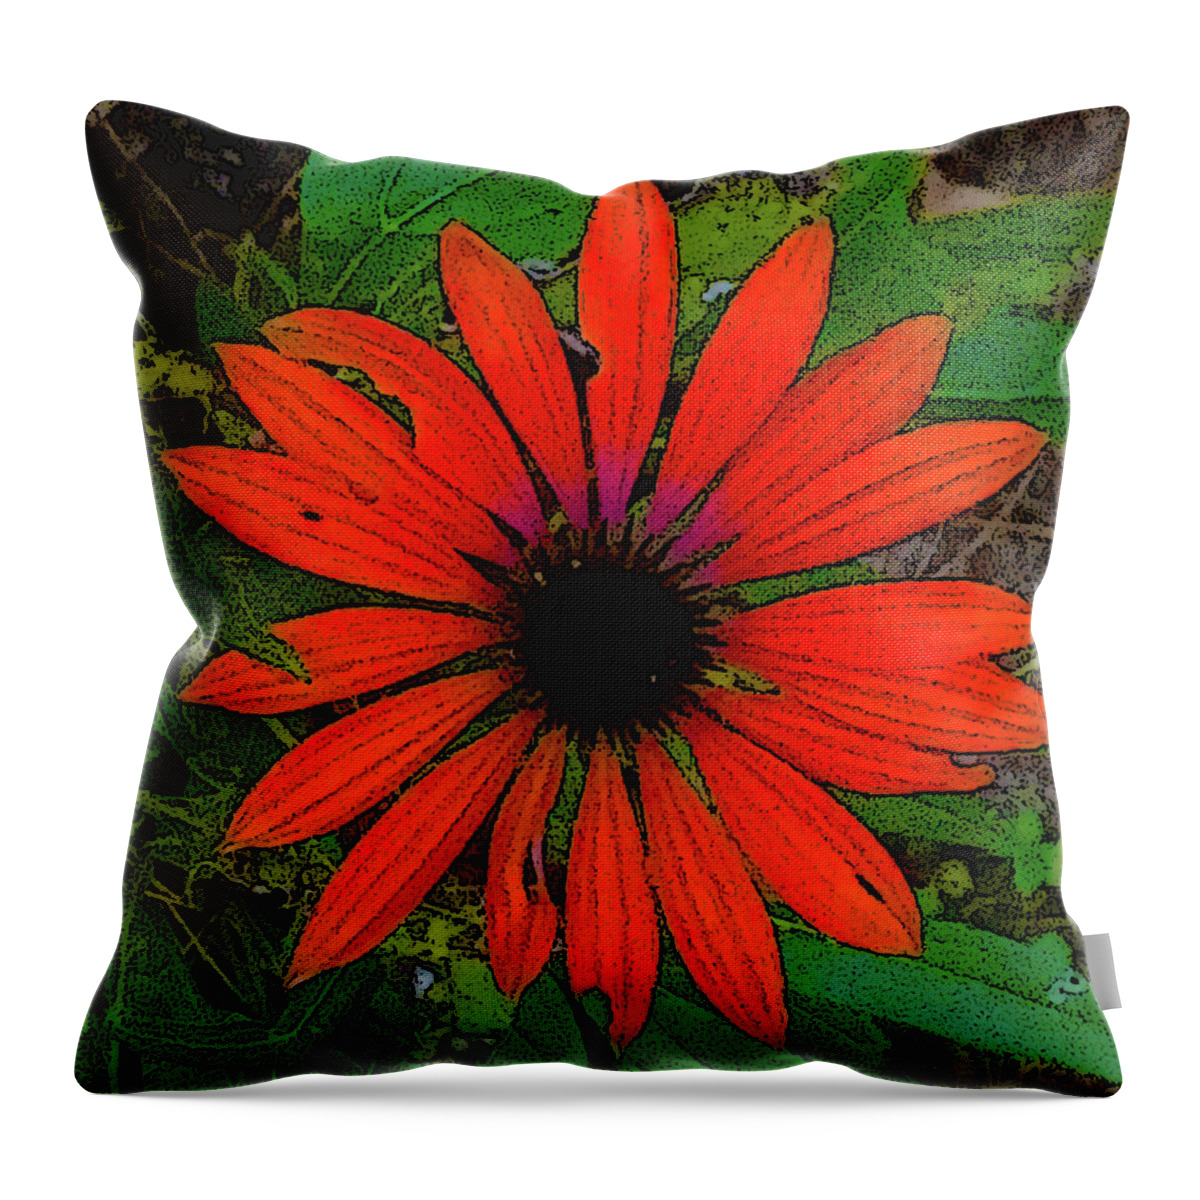 Flower Throw Pillow featuring the digital art Orange Daisy by Rod Whyte